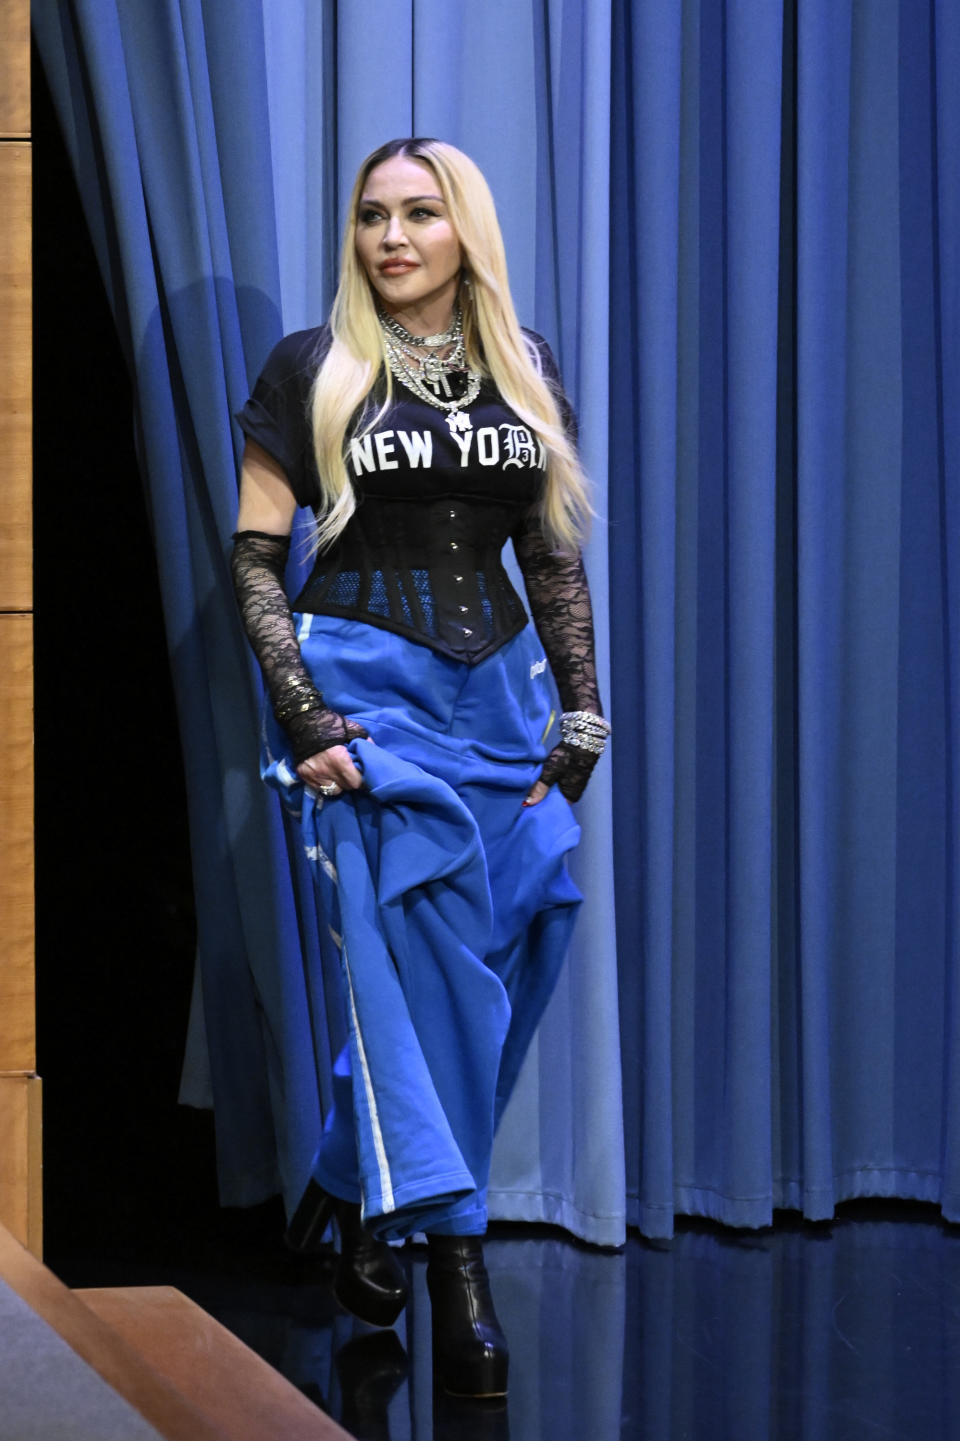 THE TONIGHT SHOW STARRING JIMMY FALLON -- Episode 1697 -- Pictured: Singer Madonna arrives on Wednesday, August 10, 2022 -- (Photo by: Todd Owyoung/NBC via Getty Images)